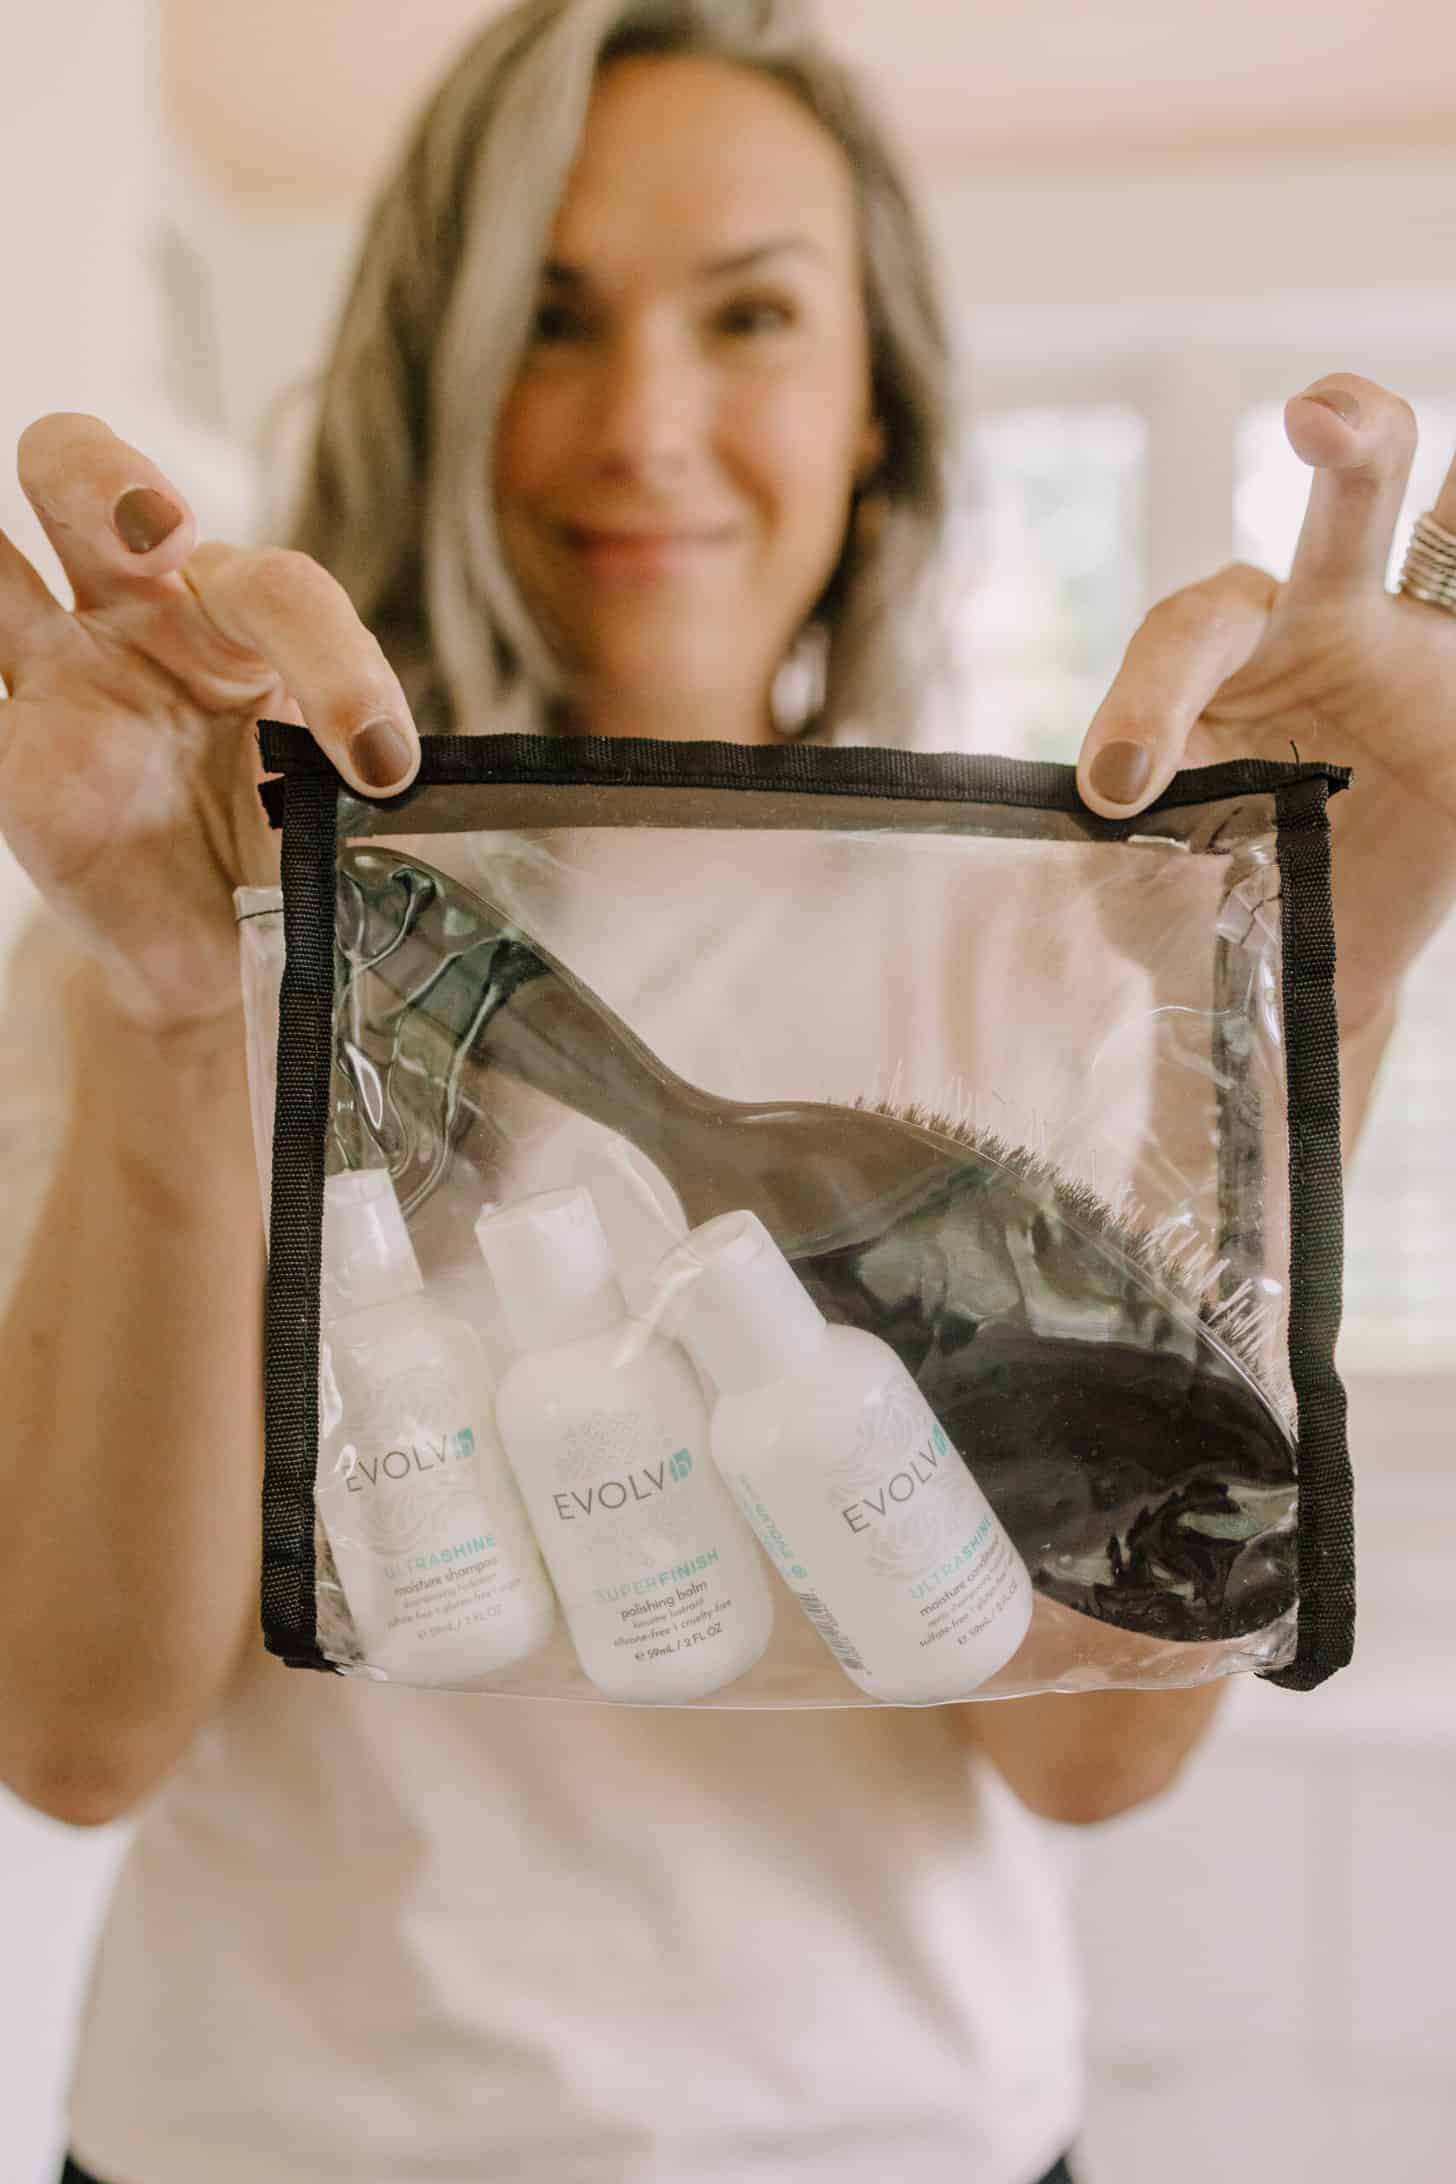 a woman holds up a small bag of evolvh travel sized hair care products and a brush